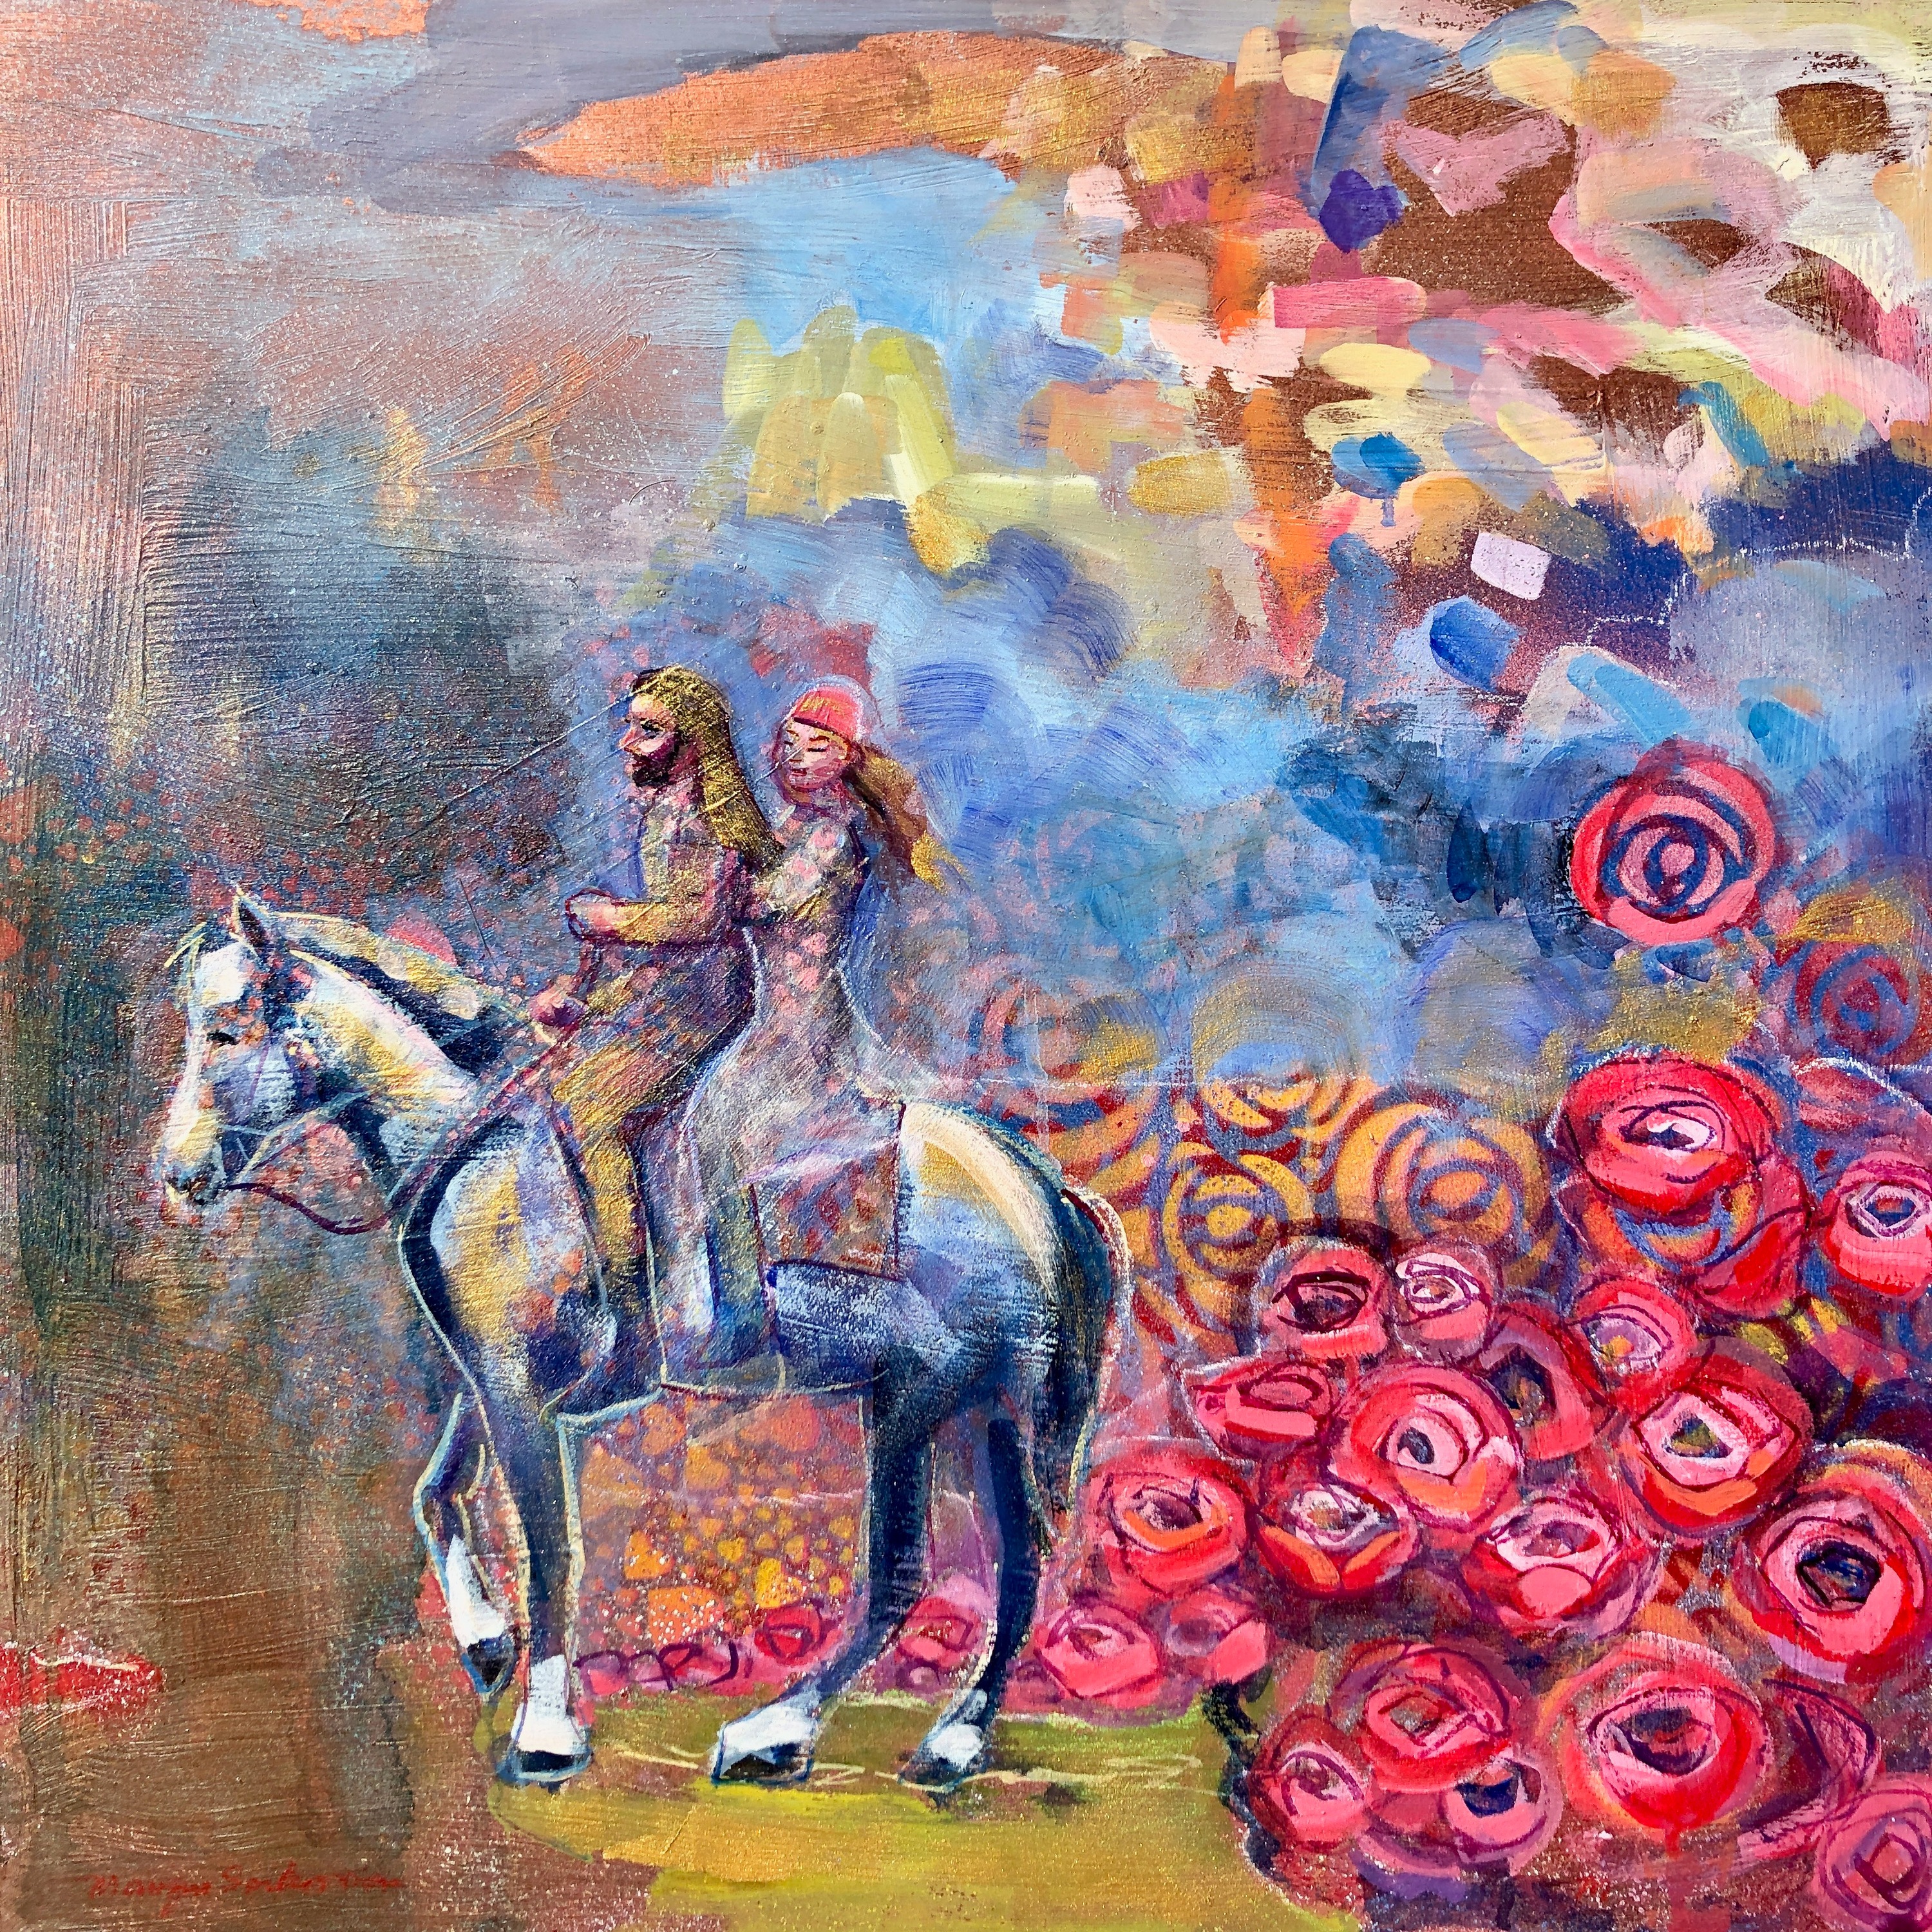 In the king s garden beloved riders 1 mixed media 24x24 r6nj3r